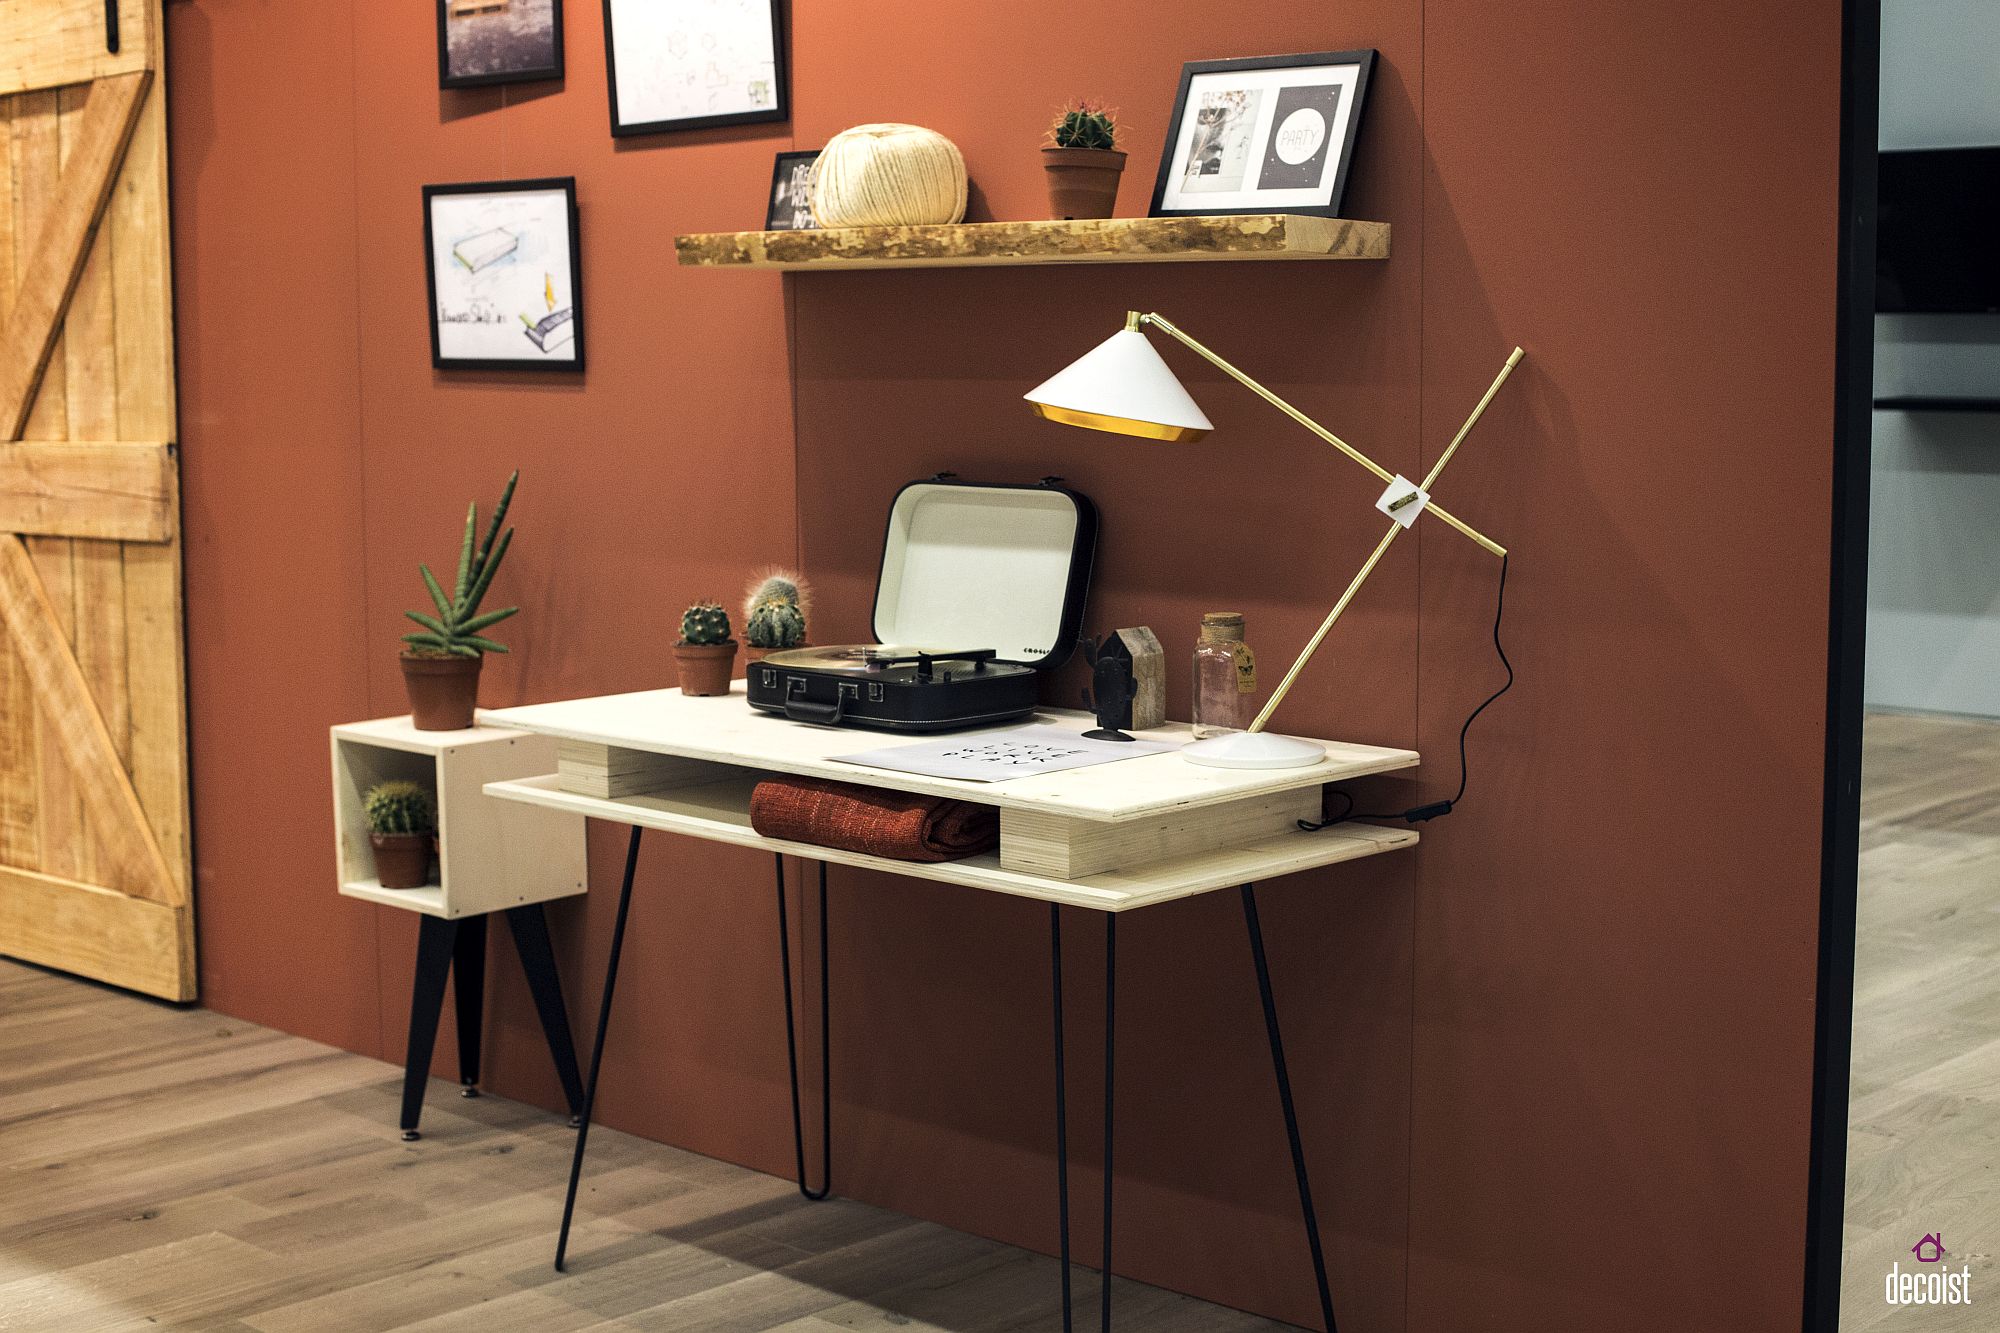 Ultra stylish work desk with hairpin legs turns even the smallest space into workzone